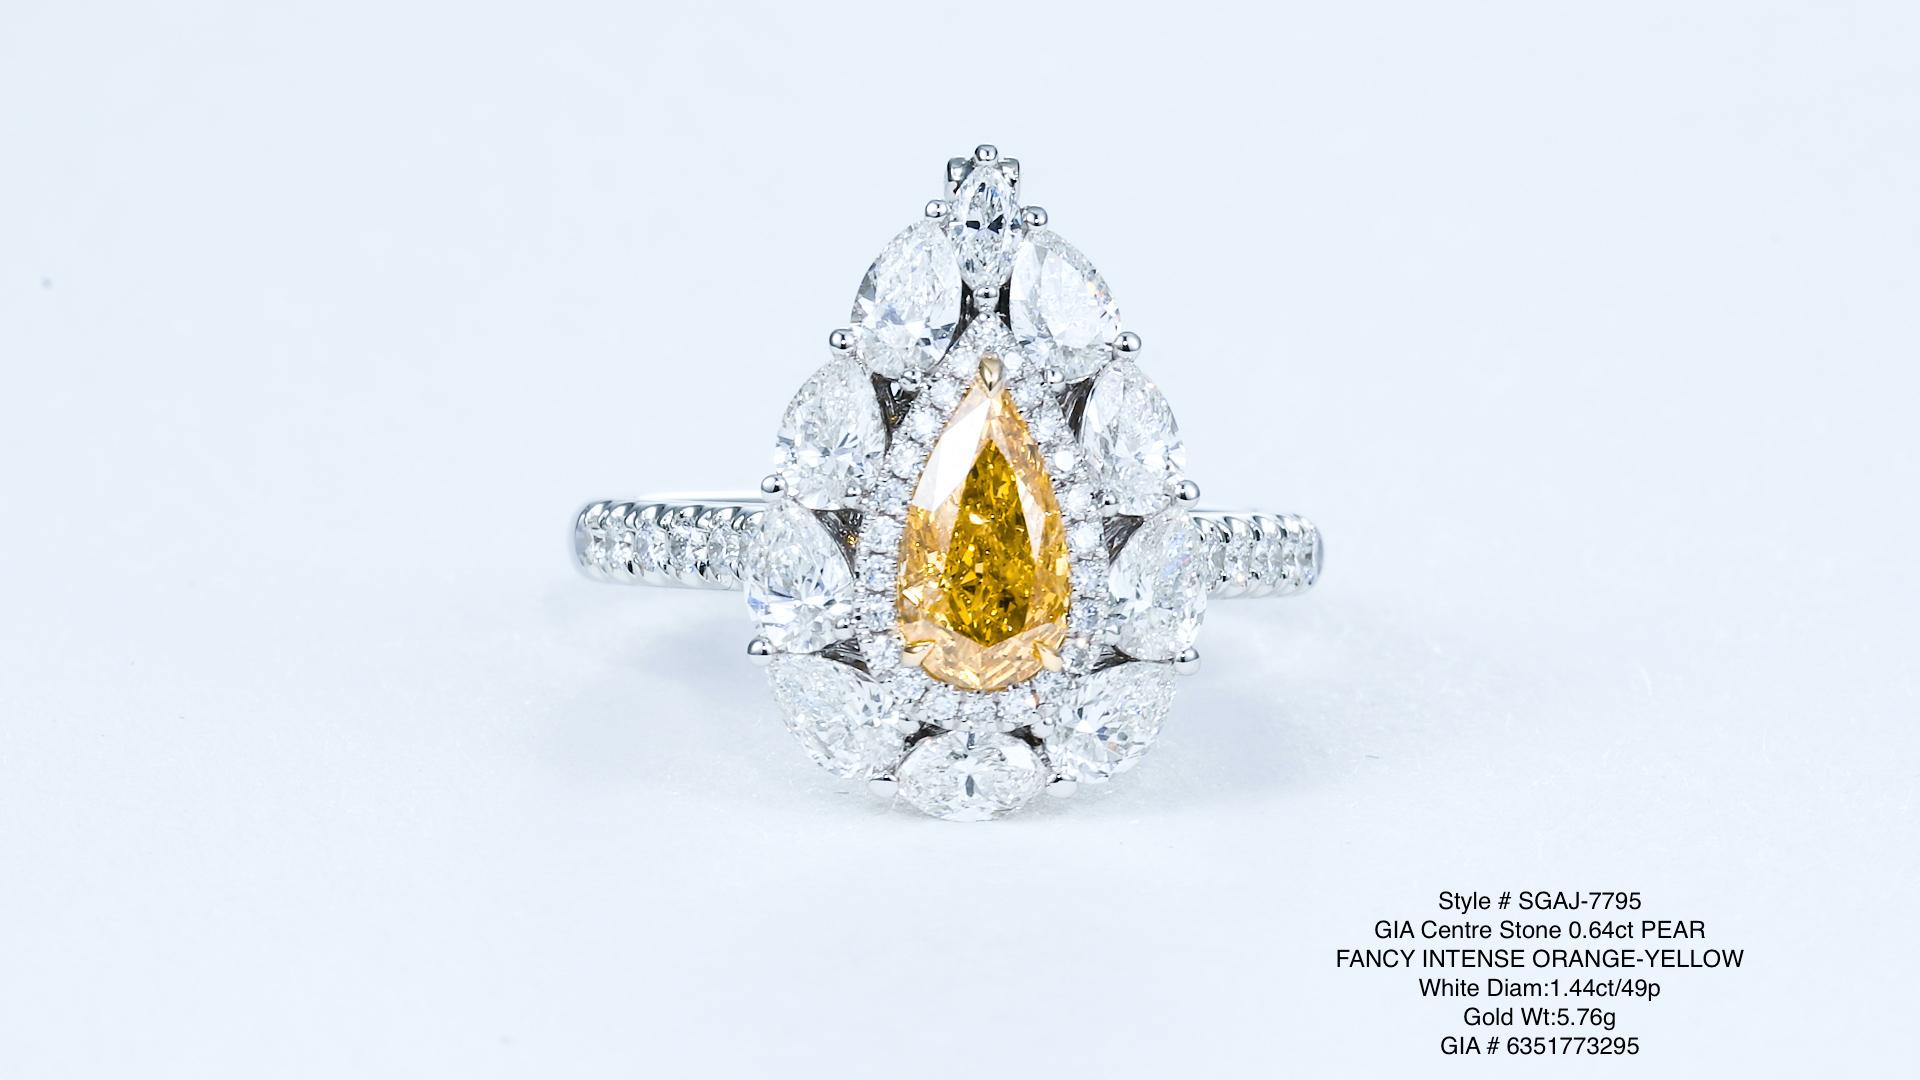 Presenting an extraordinary piece of jewelry featuring a remarkable 0.64ct natural fancy intense orange-yellow diamond, elegantly set on an 18kt gold ring. This exquisite diamond ring is not only a stunning accessory for your finger but can also be